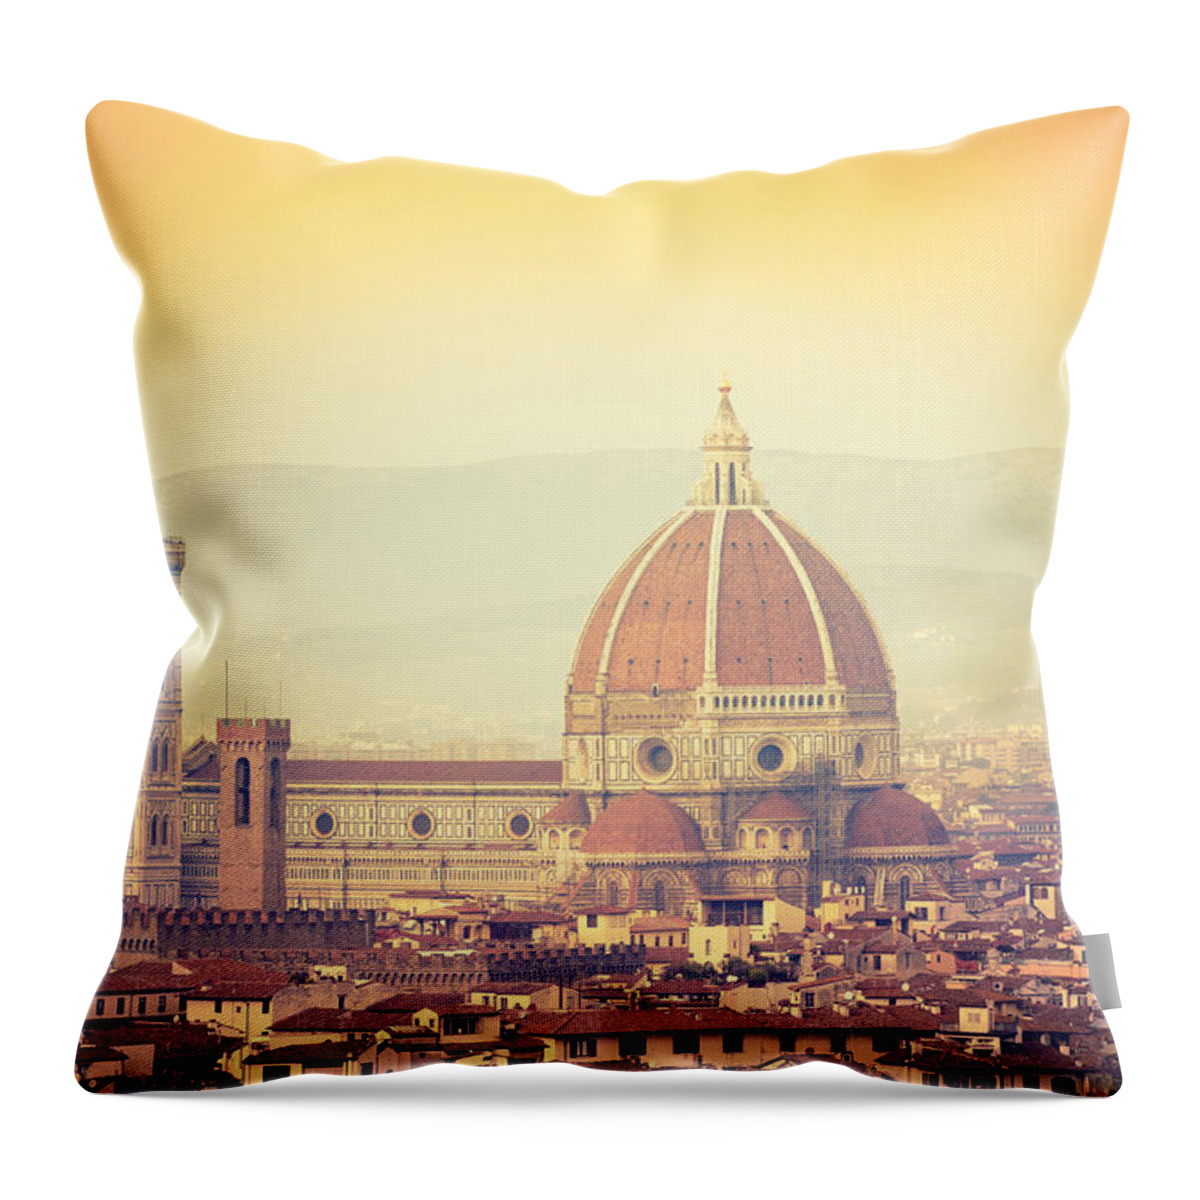 Scenics Throw Pillow featuring the photograph Santa Maria Novella Dome In Florence At #2 by Franckreporter